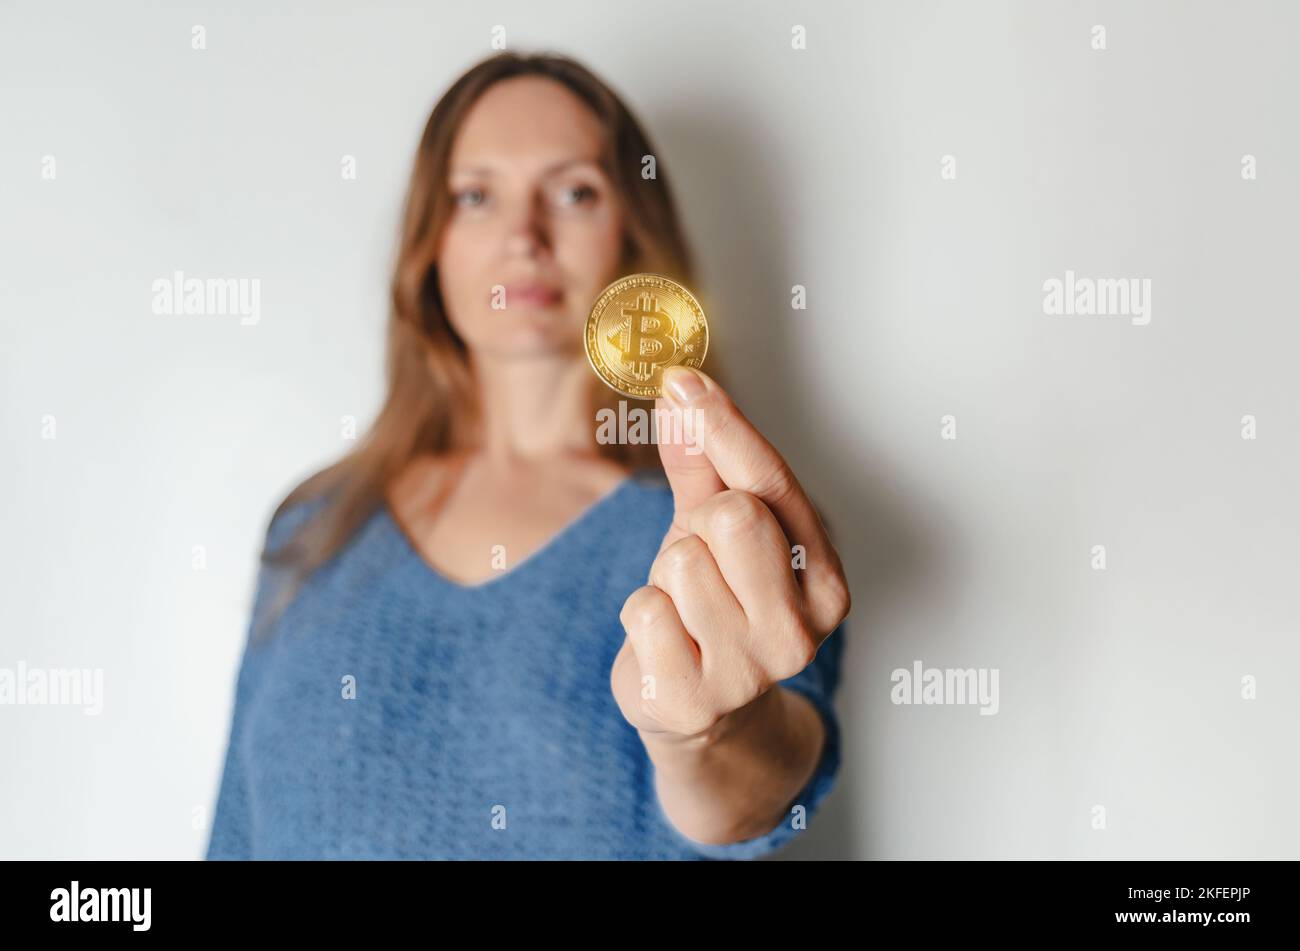 Joyful woman standing holding bitcoin paying attention to new digital cryptocurrency wearing blue sweater. Indoor studio shot isolated on white backgr Stock Photo